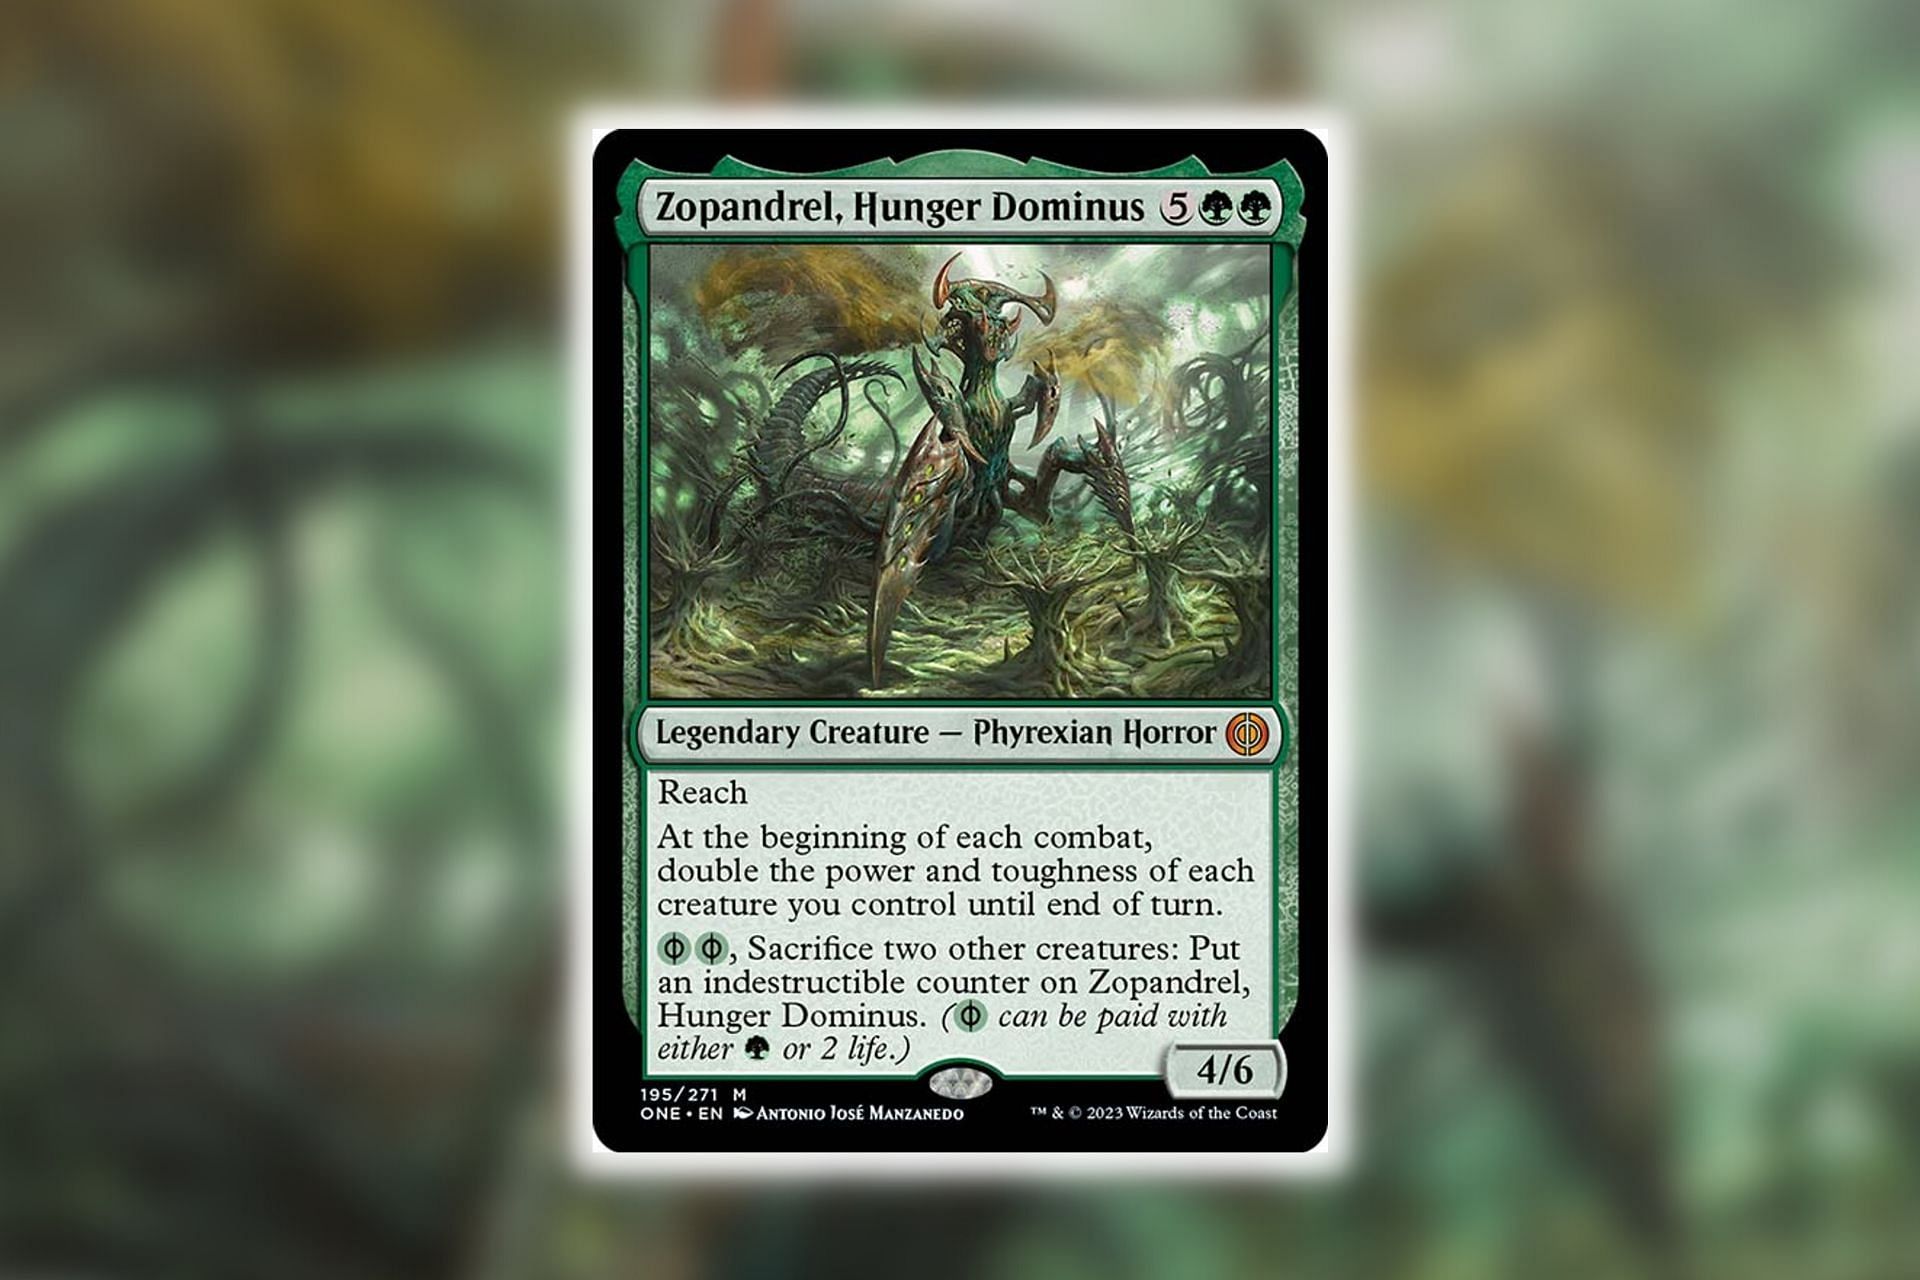 Zopandrel, Hunger Dominus in Magic: The Gathering (Image via Wizards of the Coast)